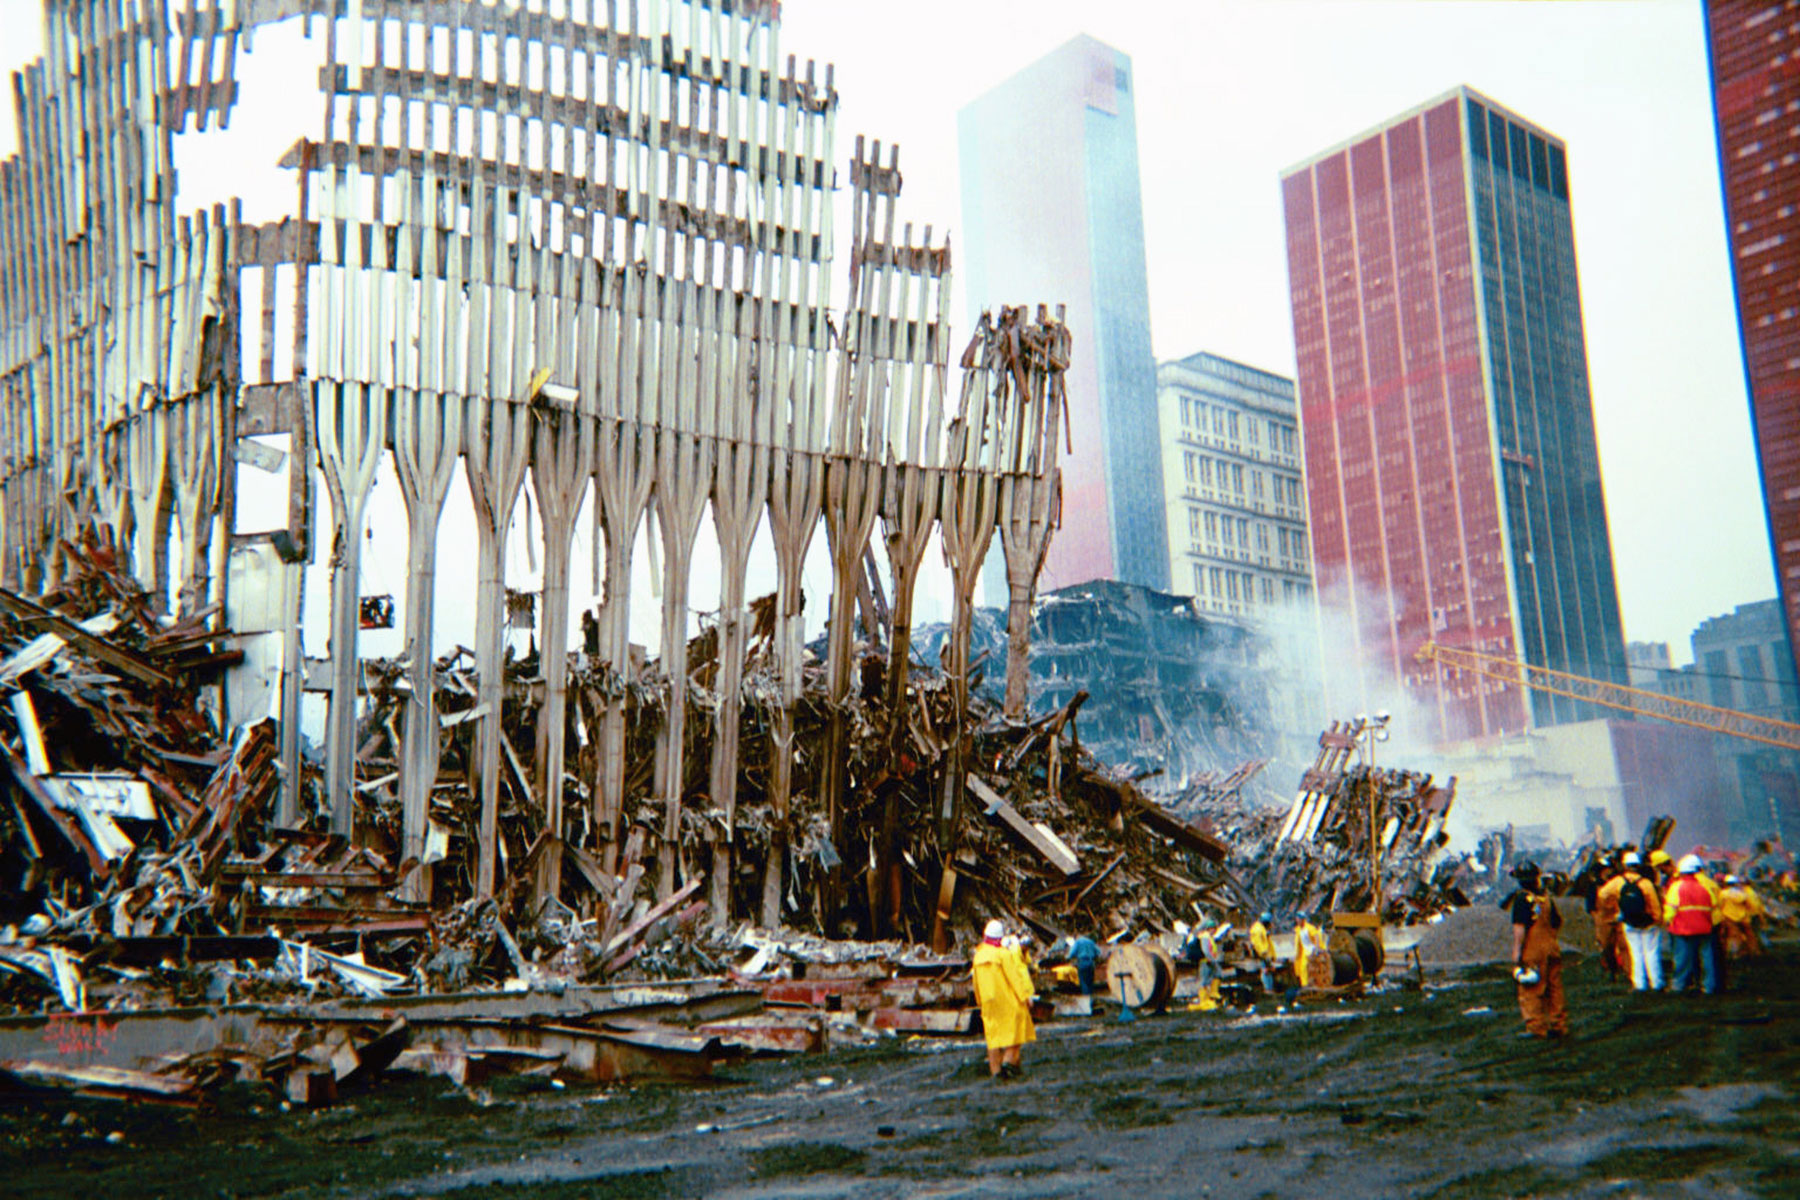 Photo Essay: In the aftermath at Ground Zero | The Milwaukee Independent